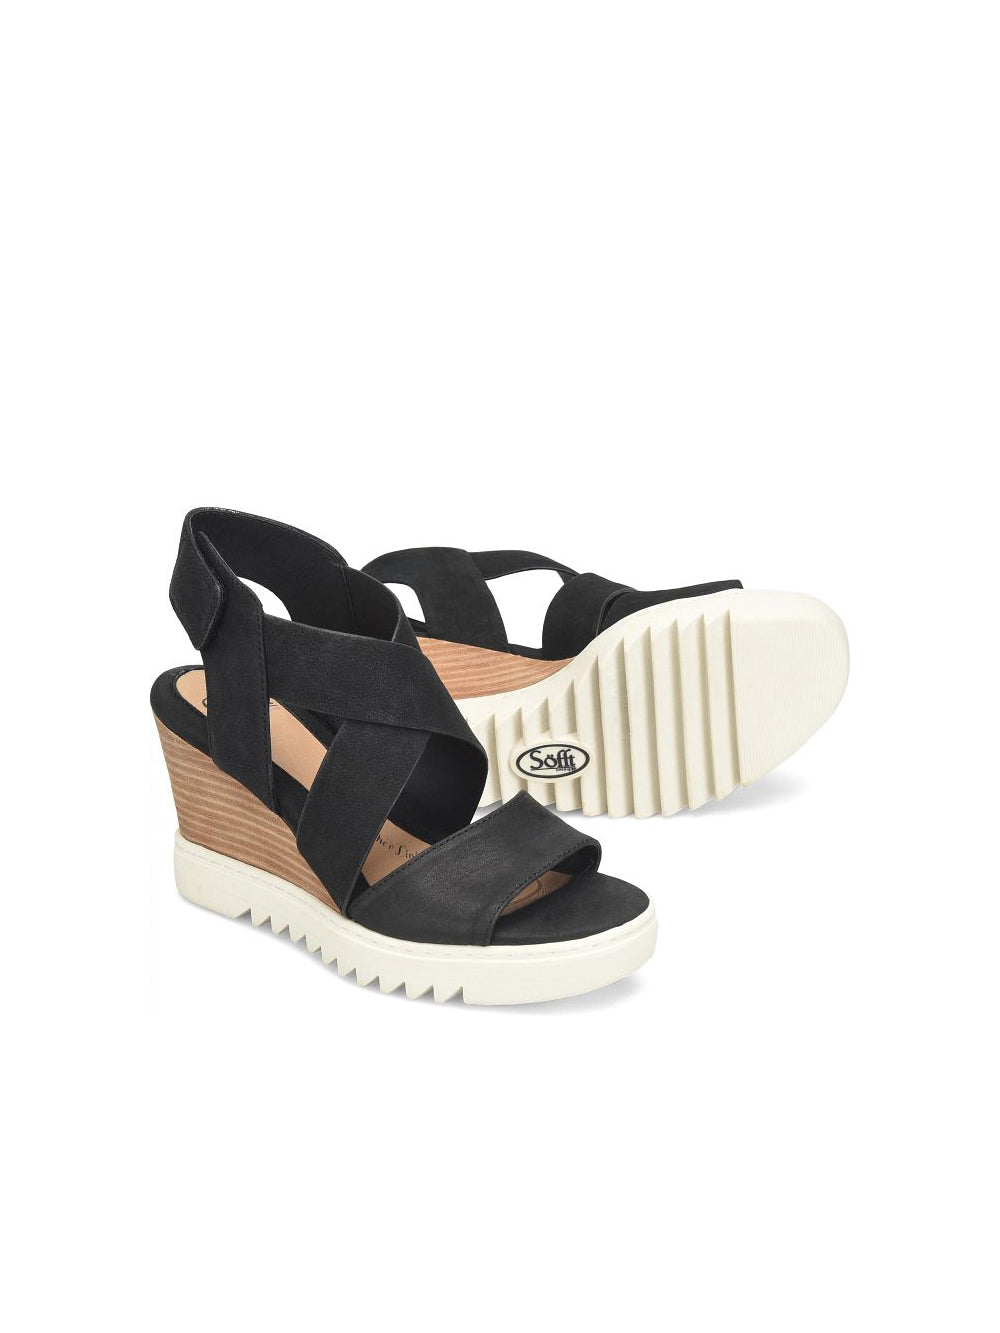 sofft shoes uxley criss-cross wedge heel sandals in black leather